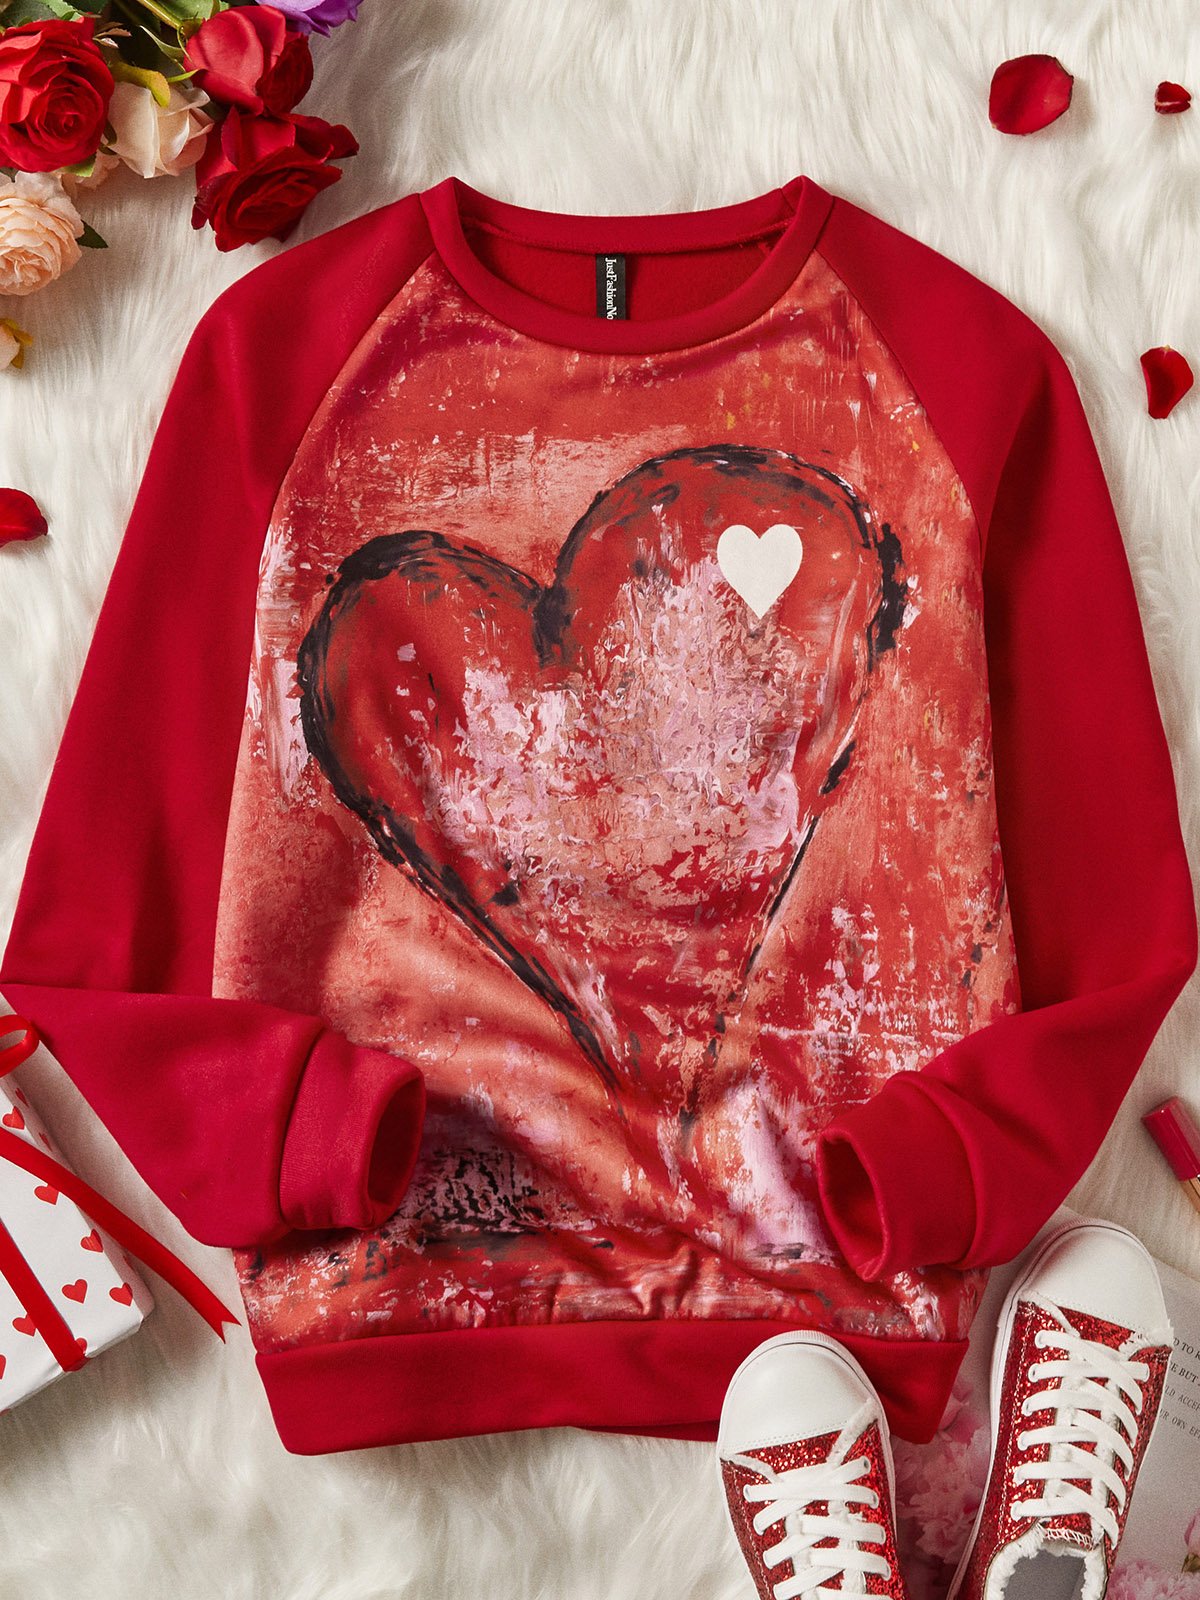 Women's Pullovers Casual Heart-shaped Color Block Long Sleeve Round Neck Pullovers Valentine's Day Gifts